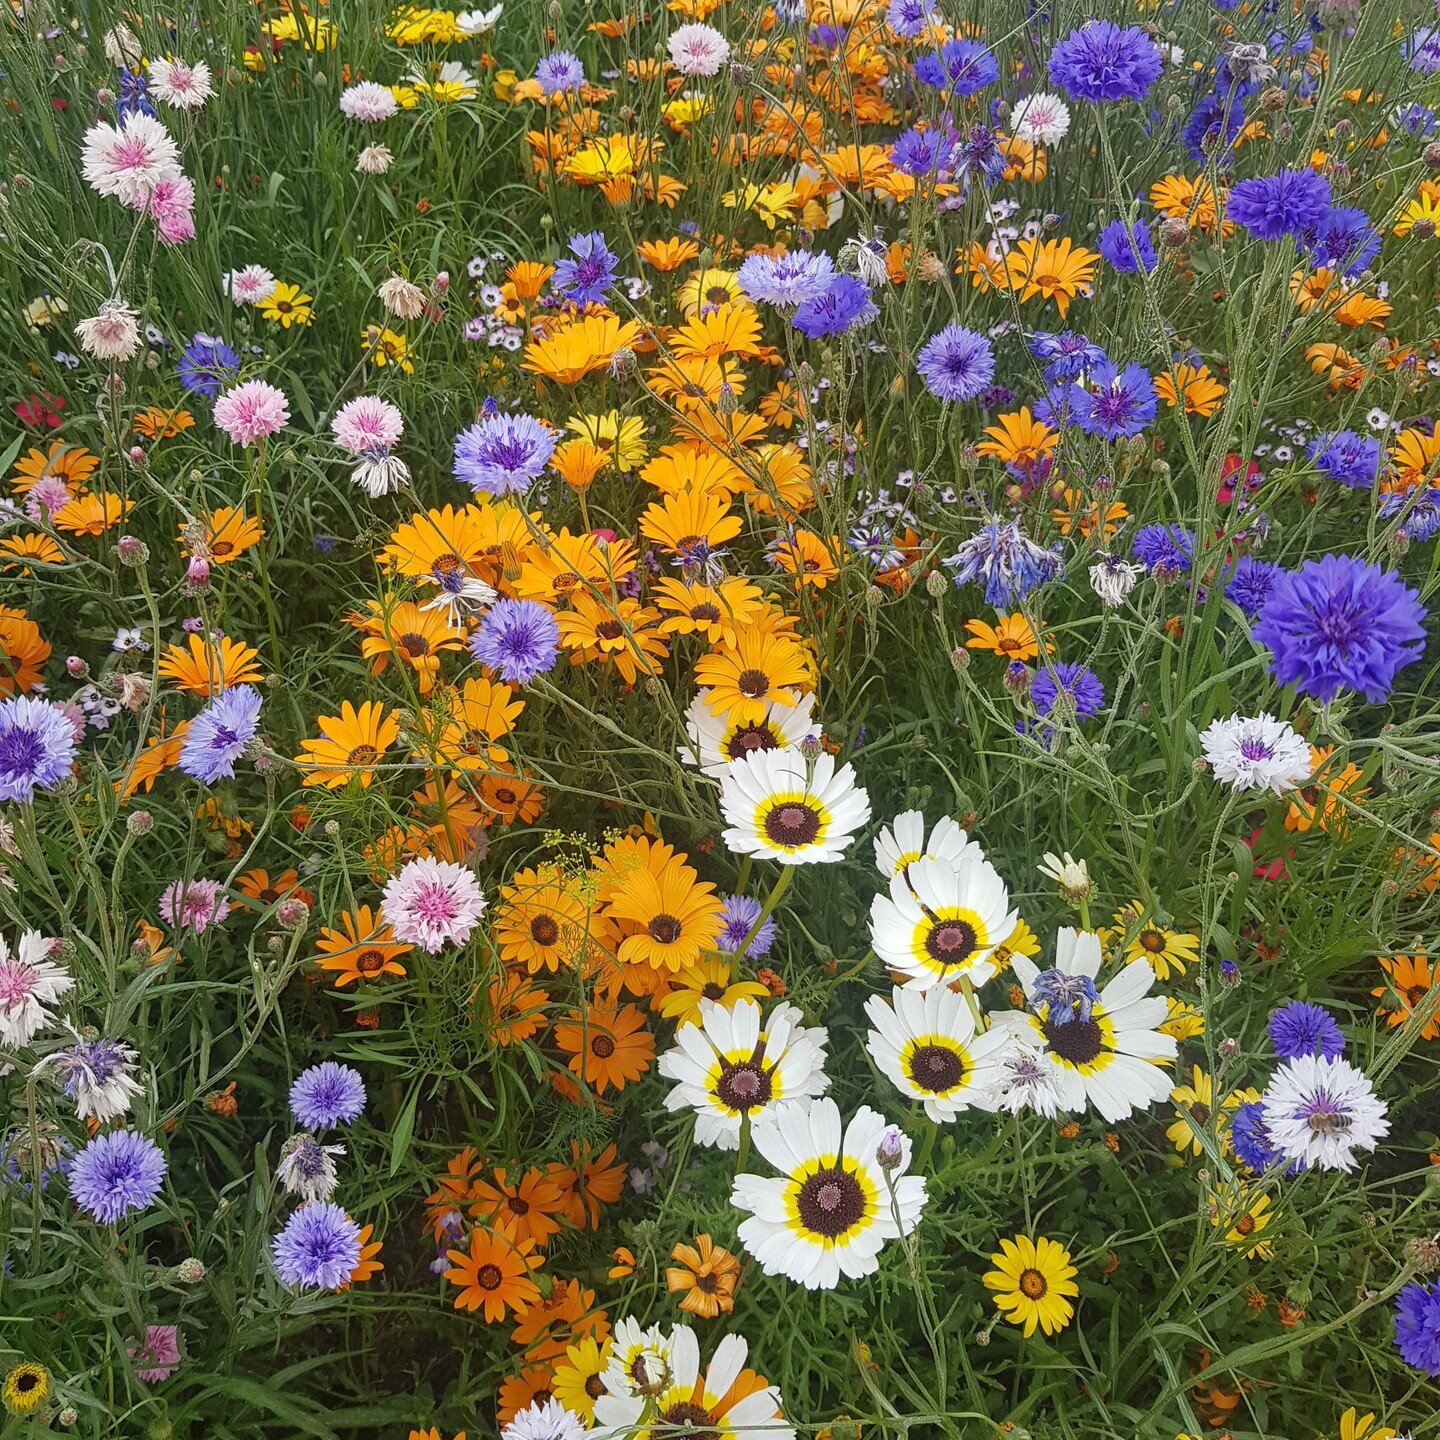 Had a fantastic visit to the amazing Superbloom this week. Buzzing with people and insects! 
A brilliant project designed by lead landscape architects @grantassocs with planting designed by @nigel.dunnett, soil scientists - Tim O'Hare Associates; wil